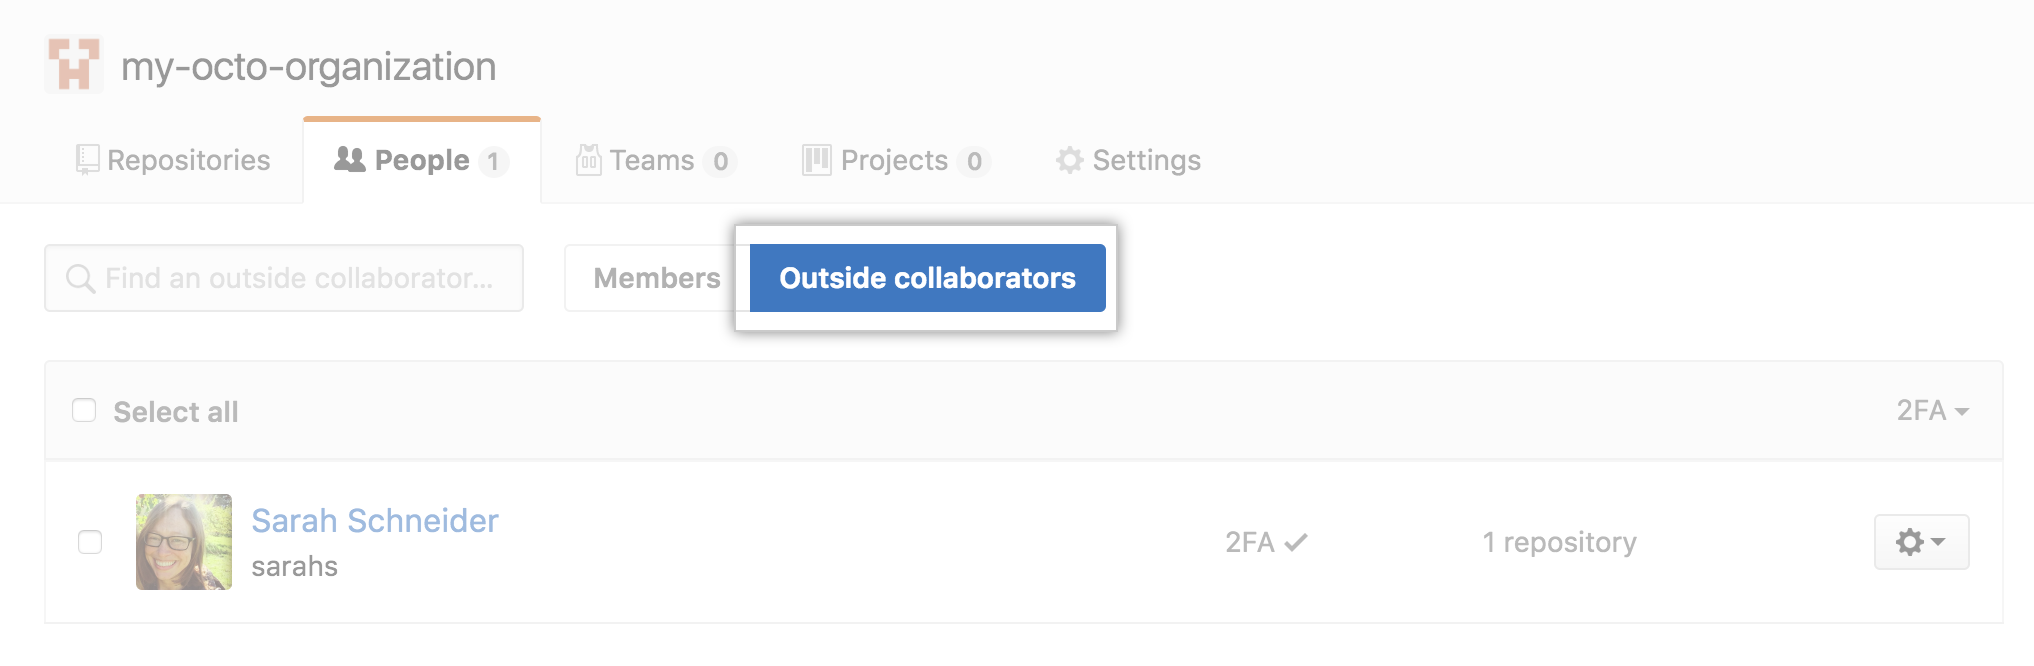 Button to select outside collaborators for an organization